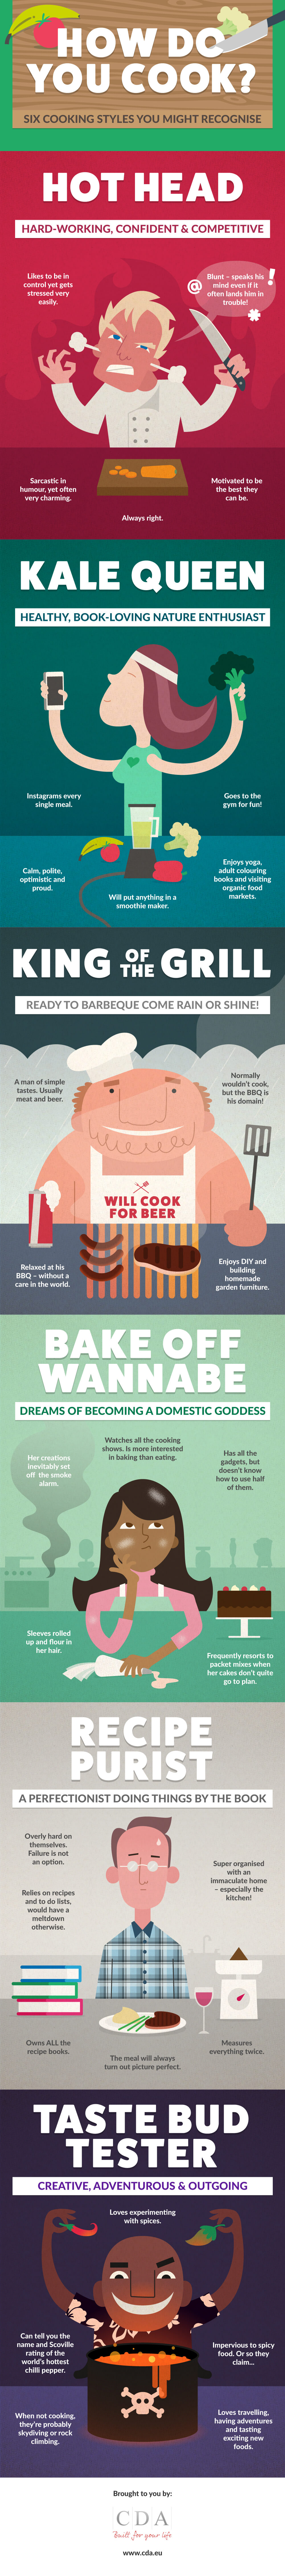 Which Type Of Cook Are You? - Infographic